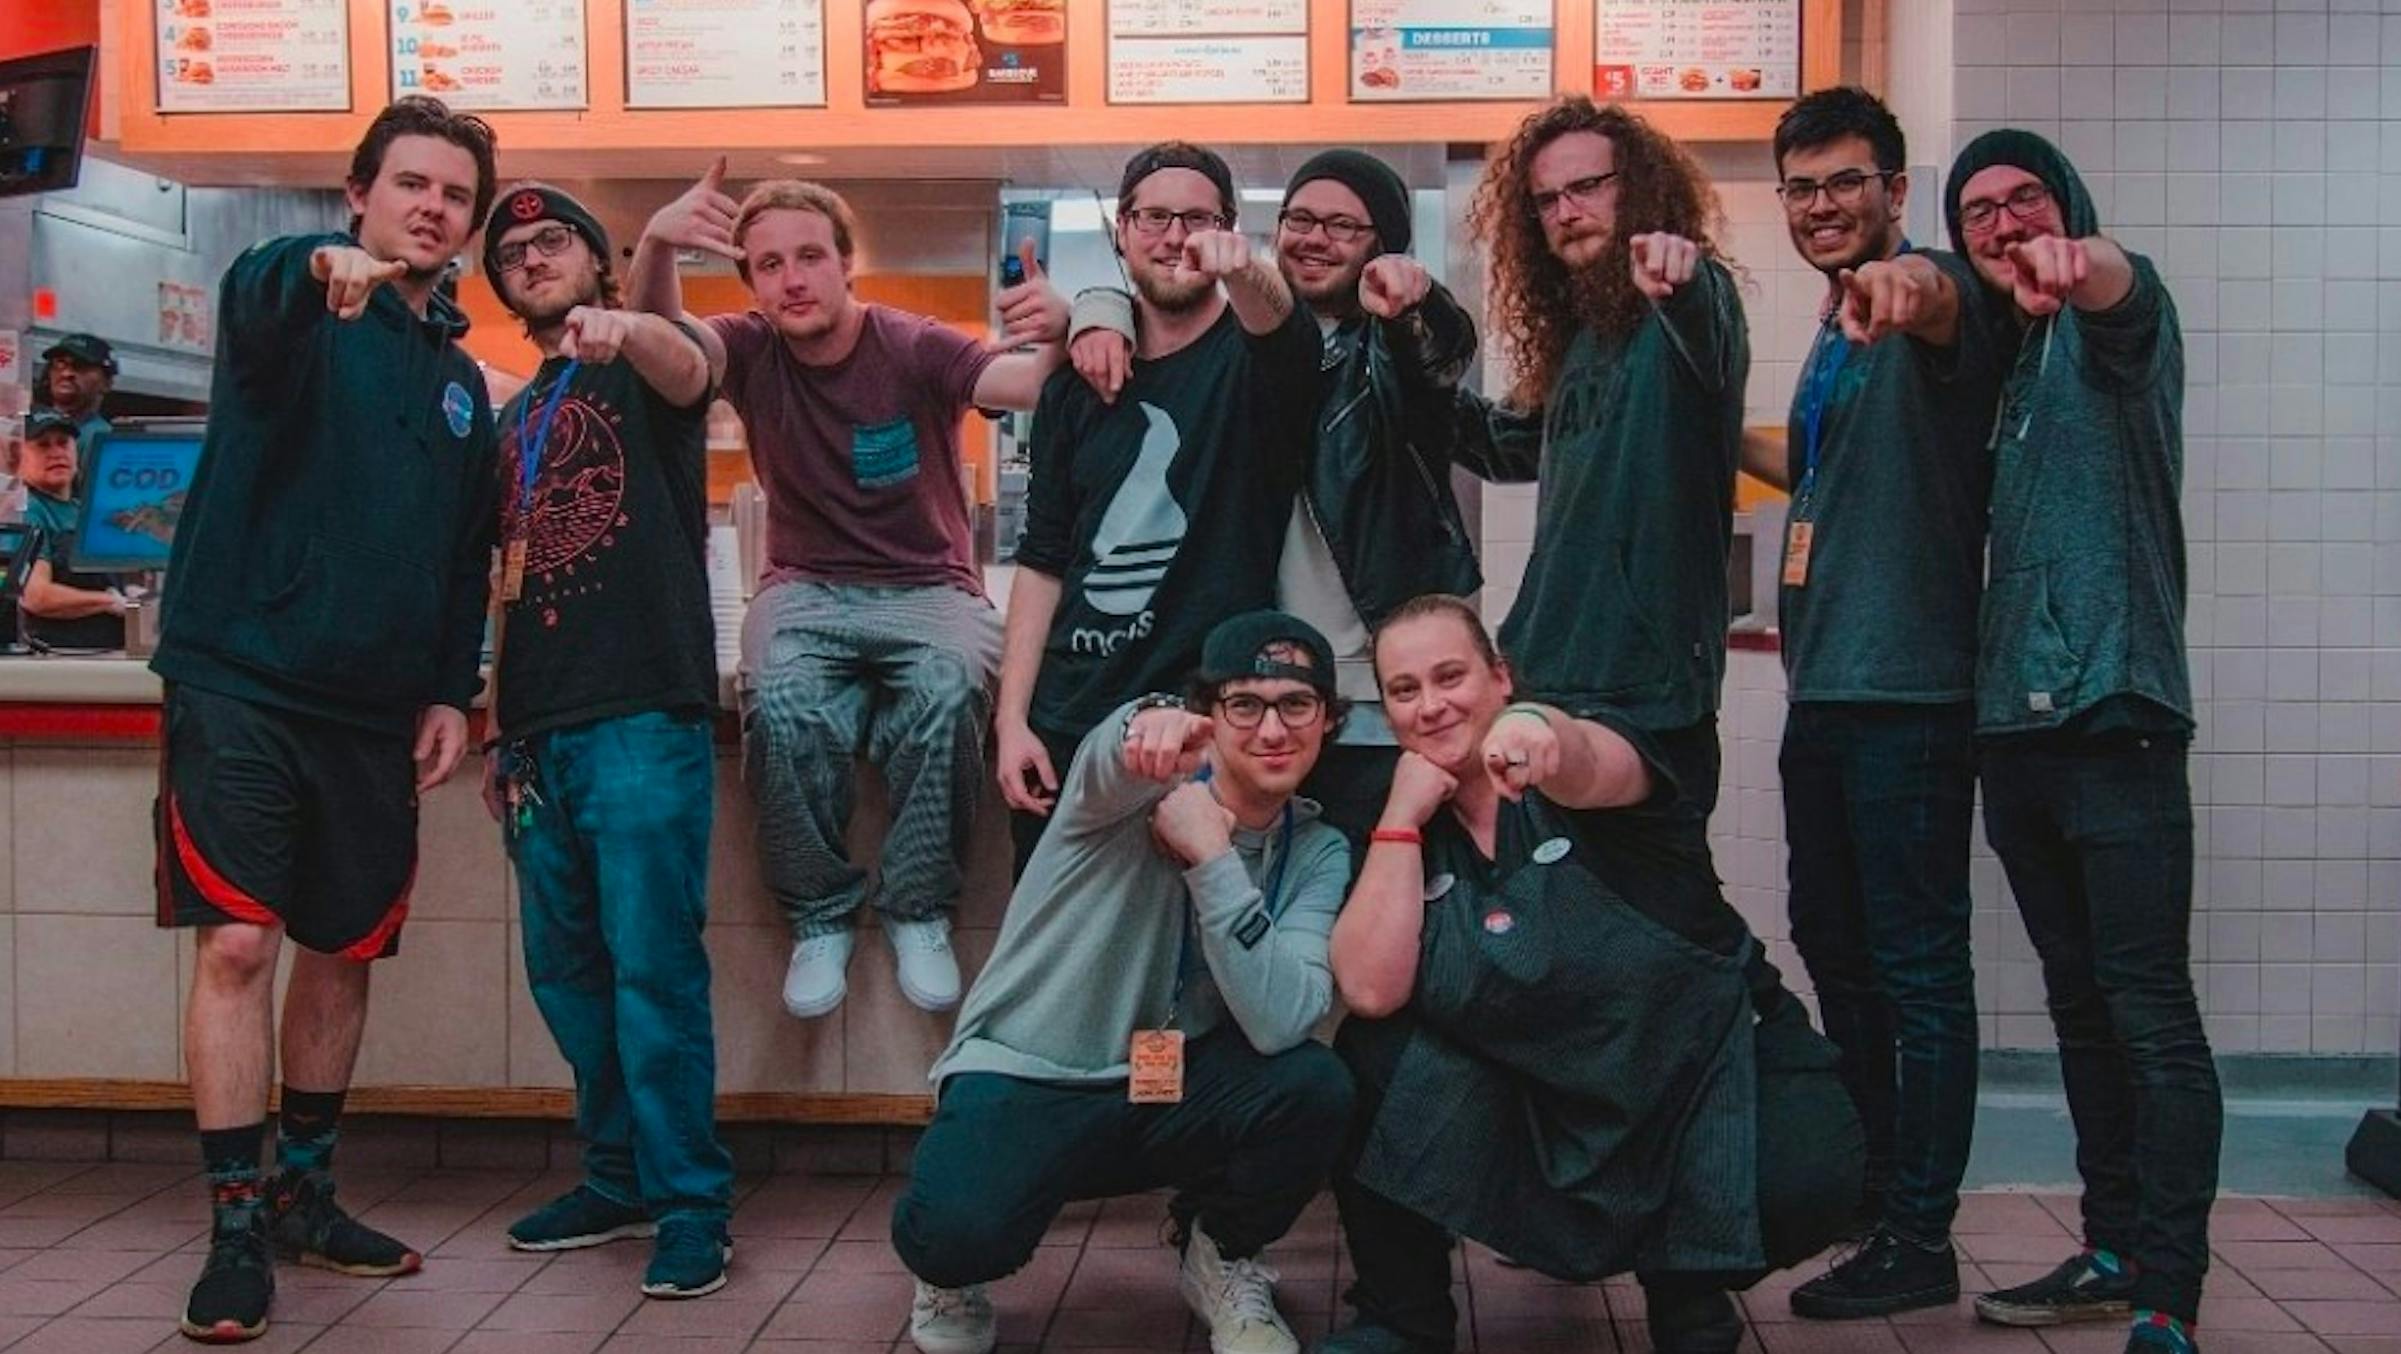 A Wendy's In Tennessee Hosted An Impromptu Metalcore Gig Last Night